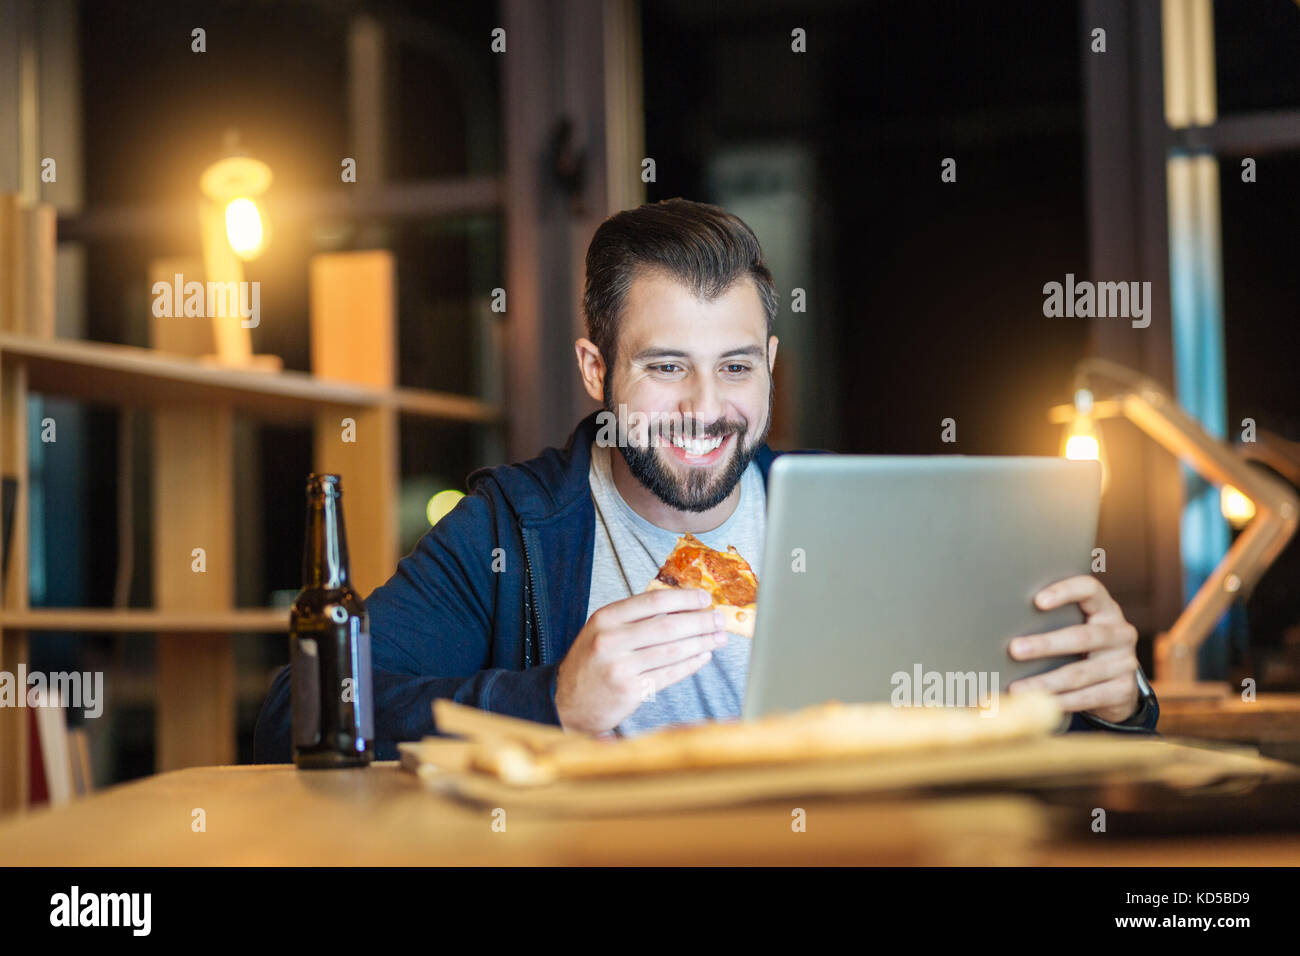 Handsome man smiling while eating Banque D'Images